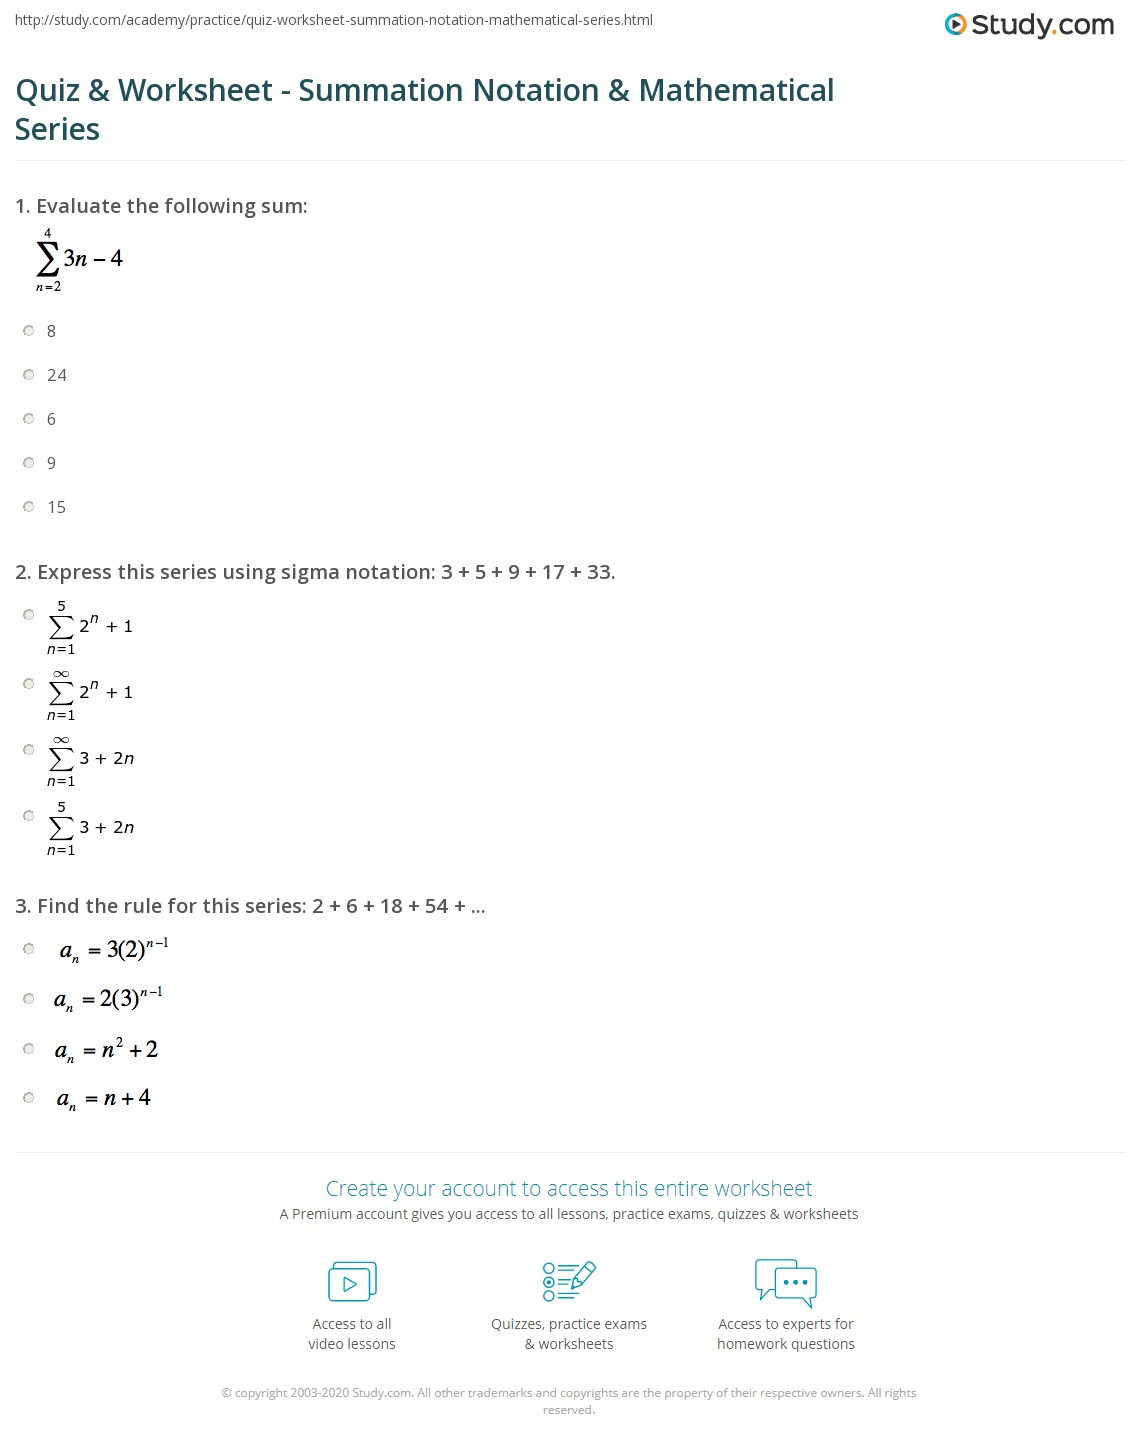 Sequences and Series Worksheet Answers Quiz &amp; Worksheet Summation Notation &amp; Mathematical Series